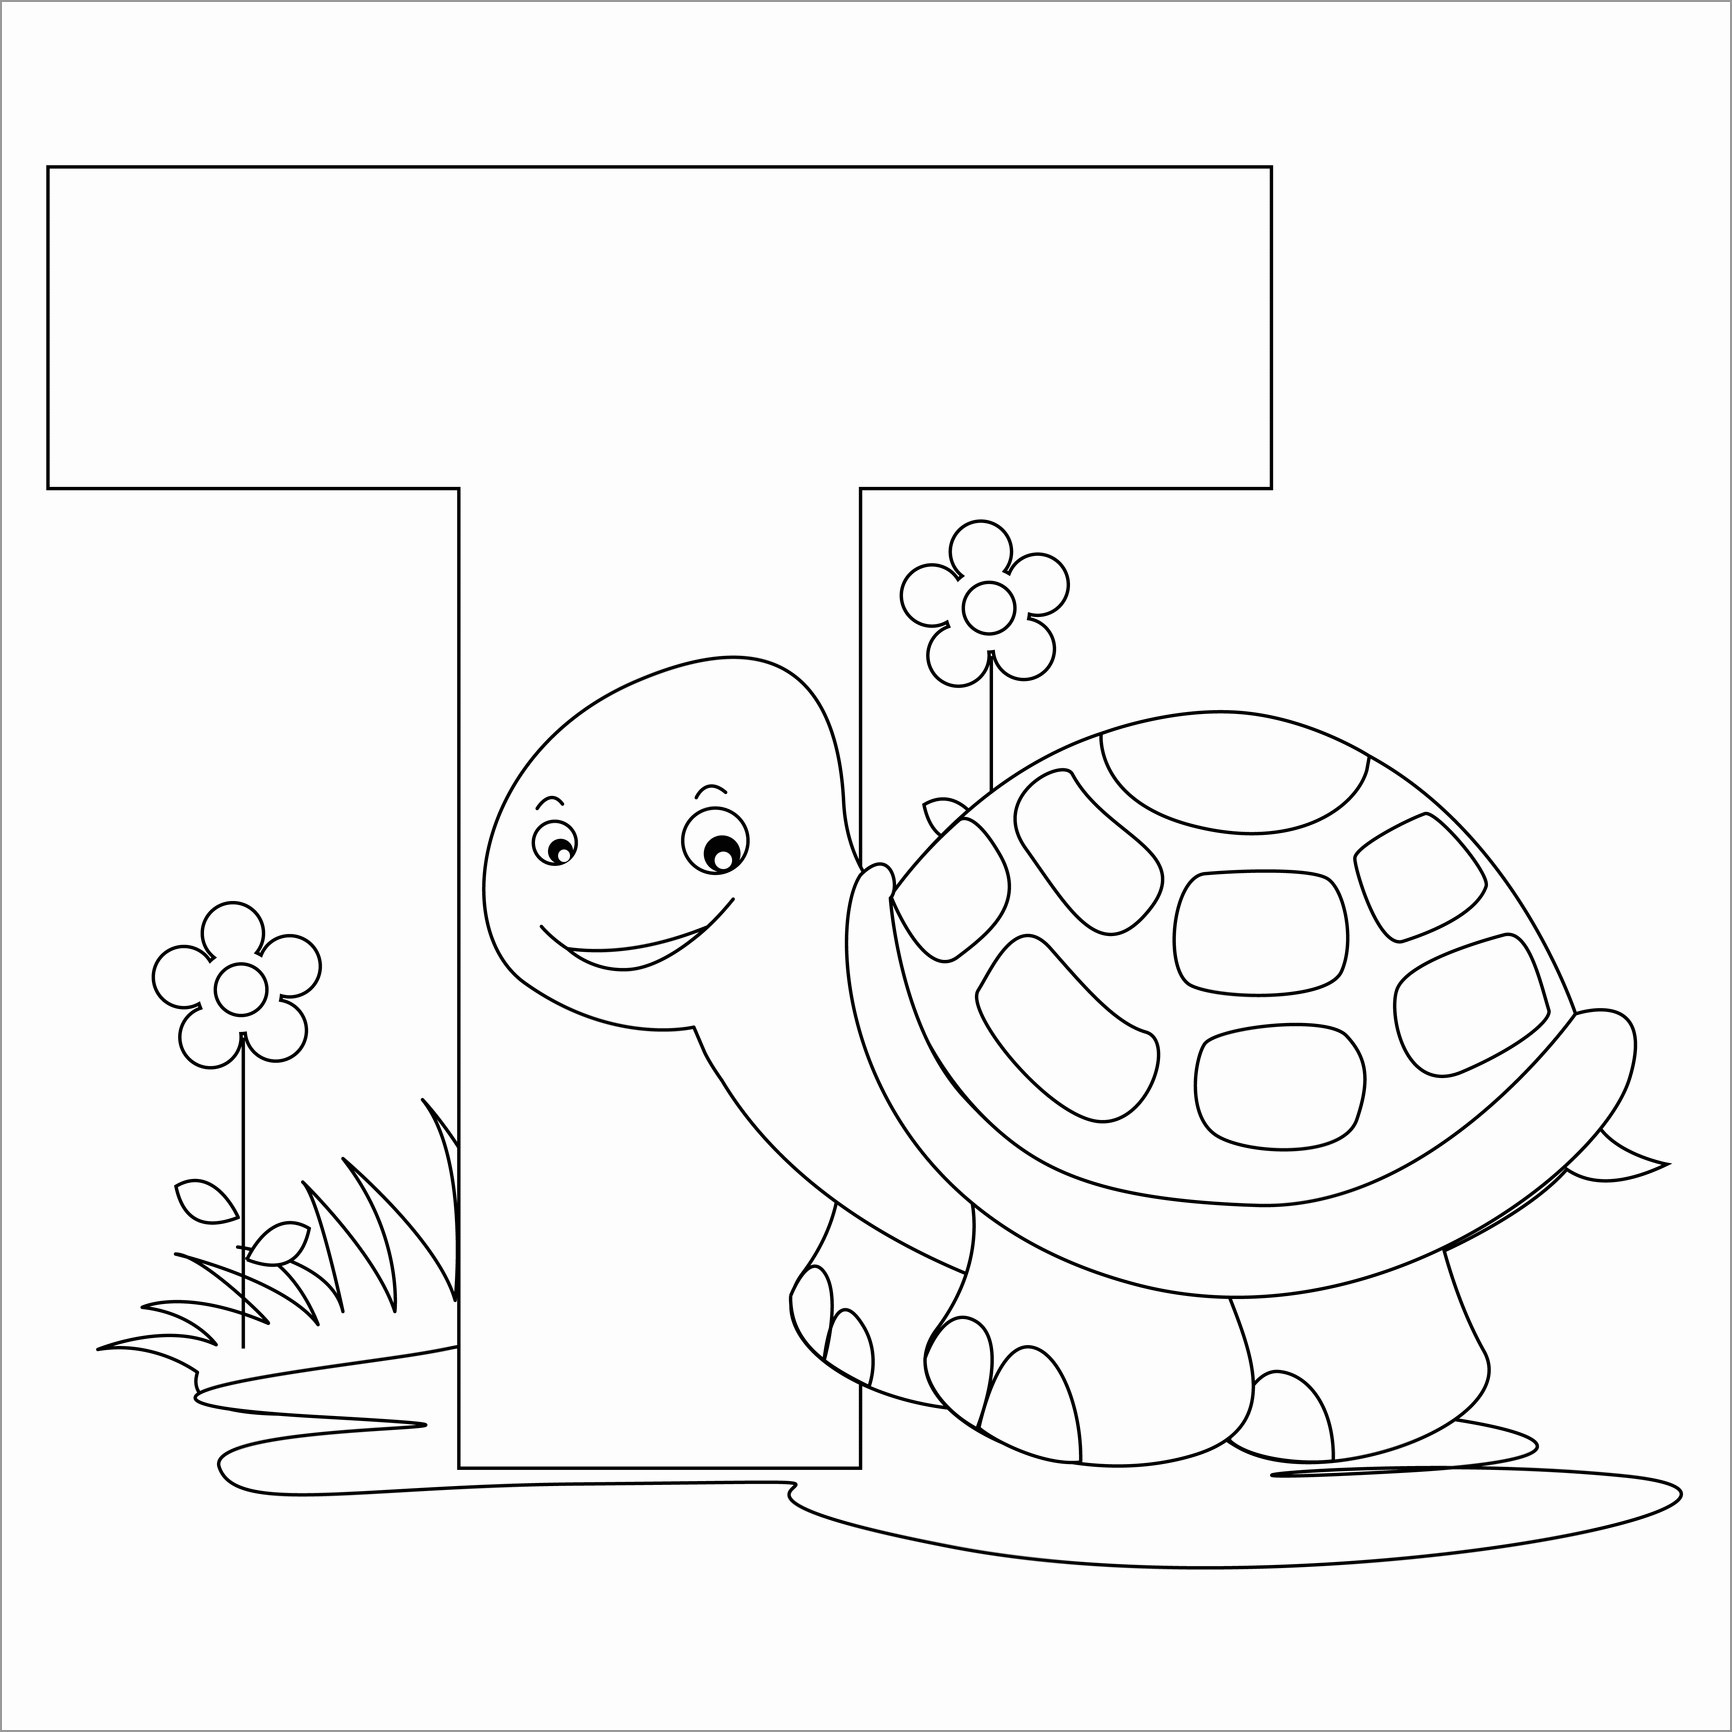 T for tortoise Coloring Page